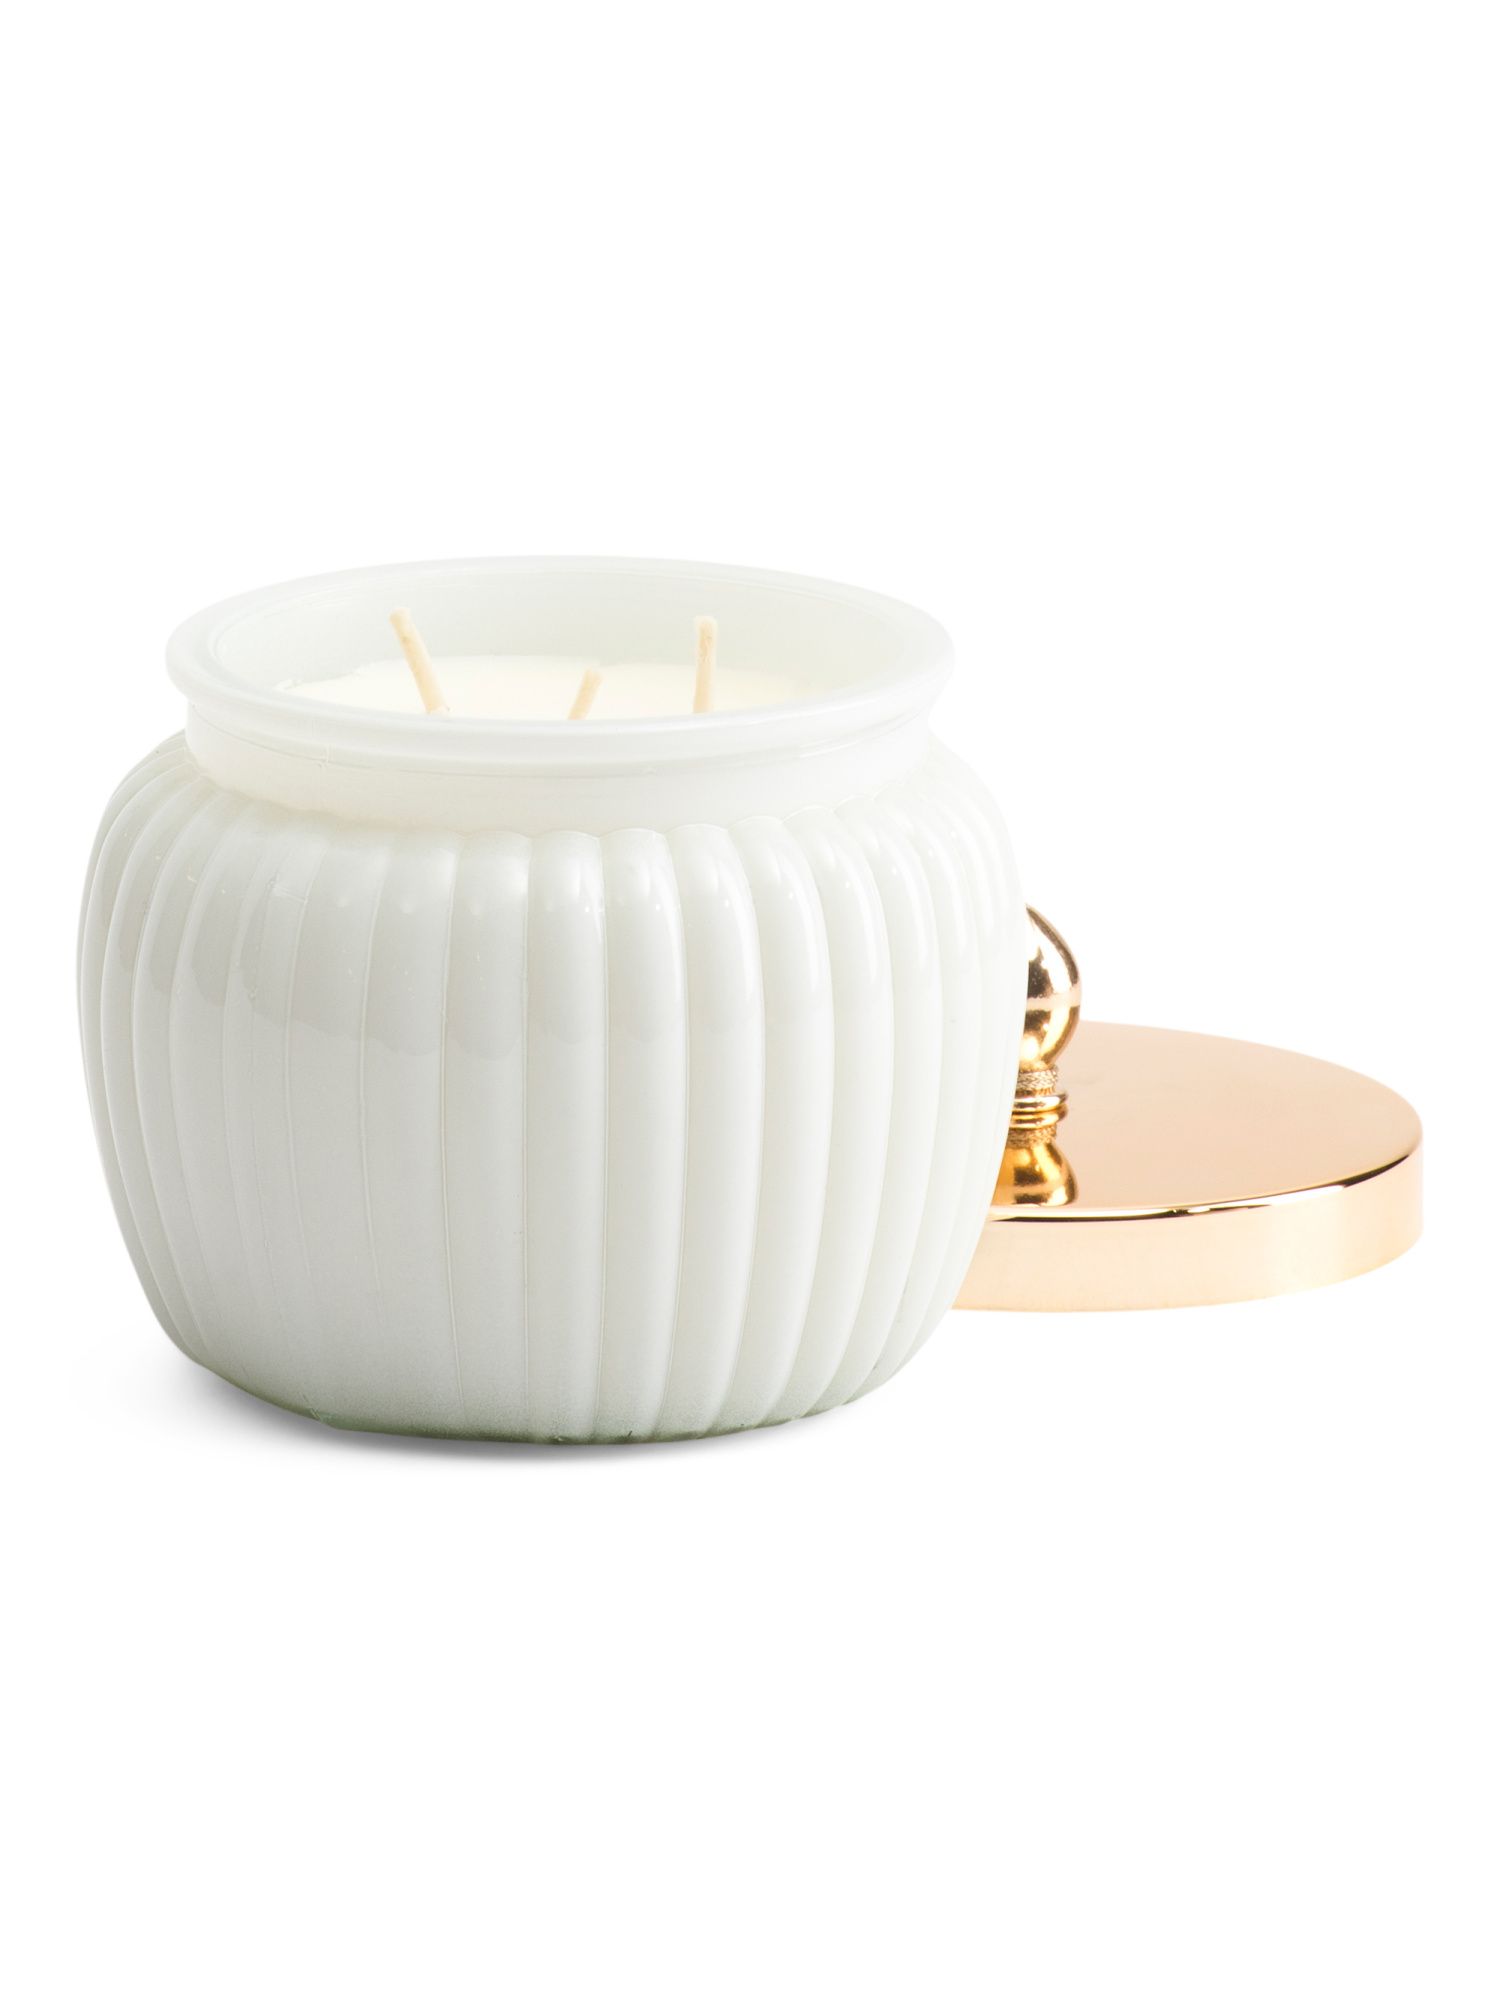 16oz White Sand Candle With Tassel Accent | TJ Maxx